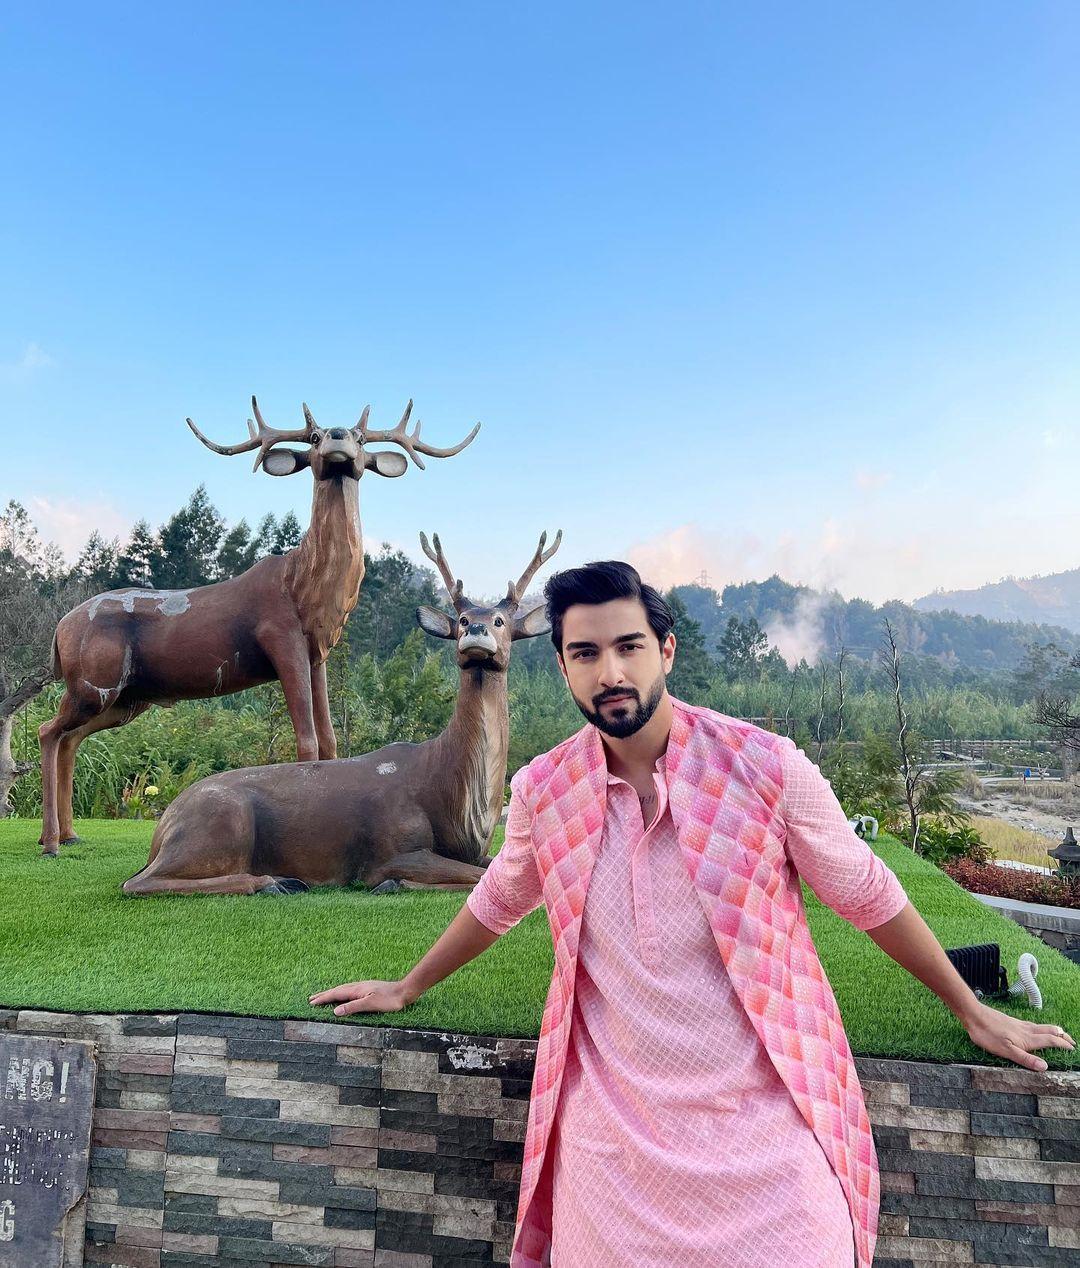 In this look, the actor paired a pink kurta with a matching embroidered jacket, making everyone blush as he looks super hot